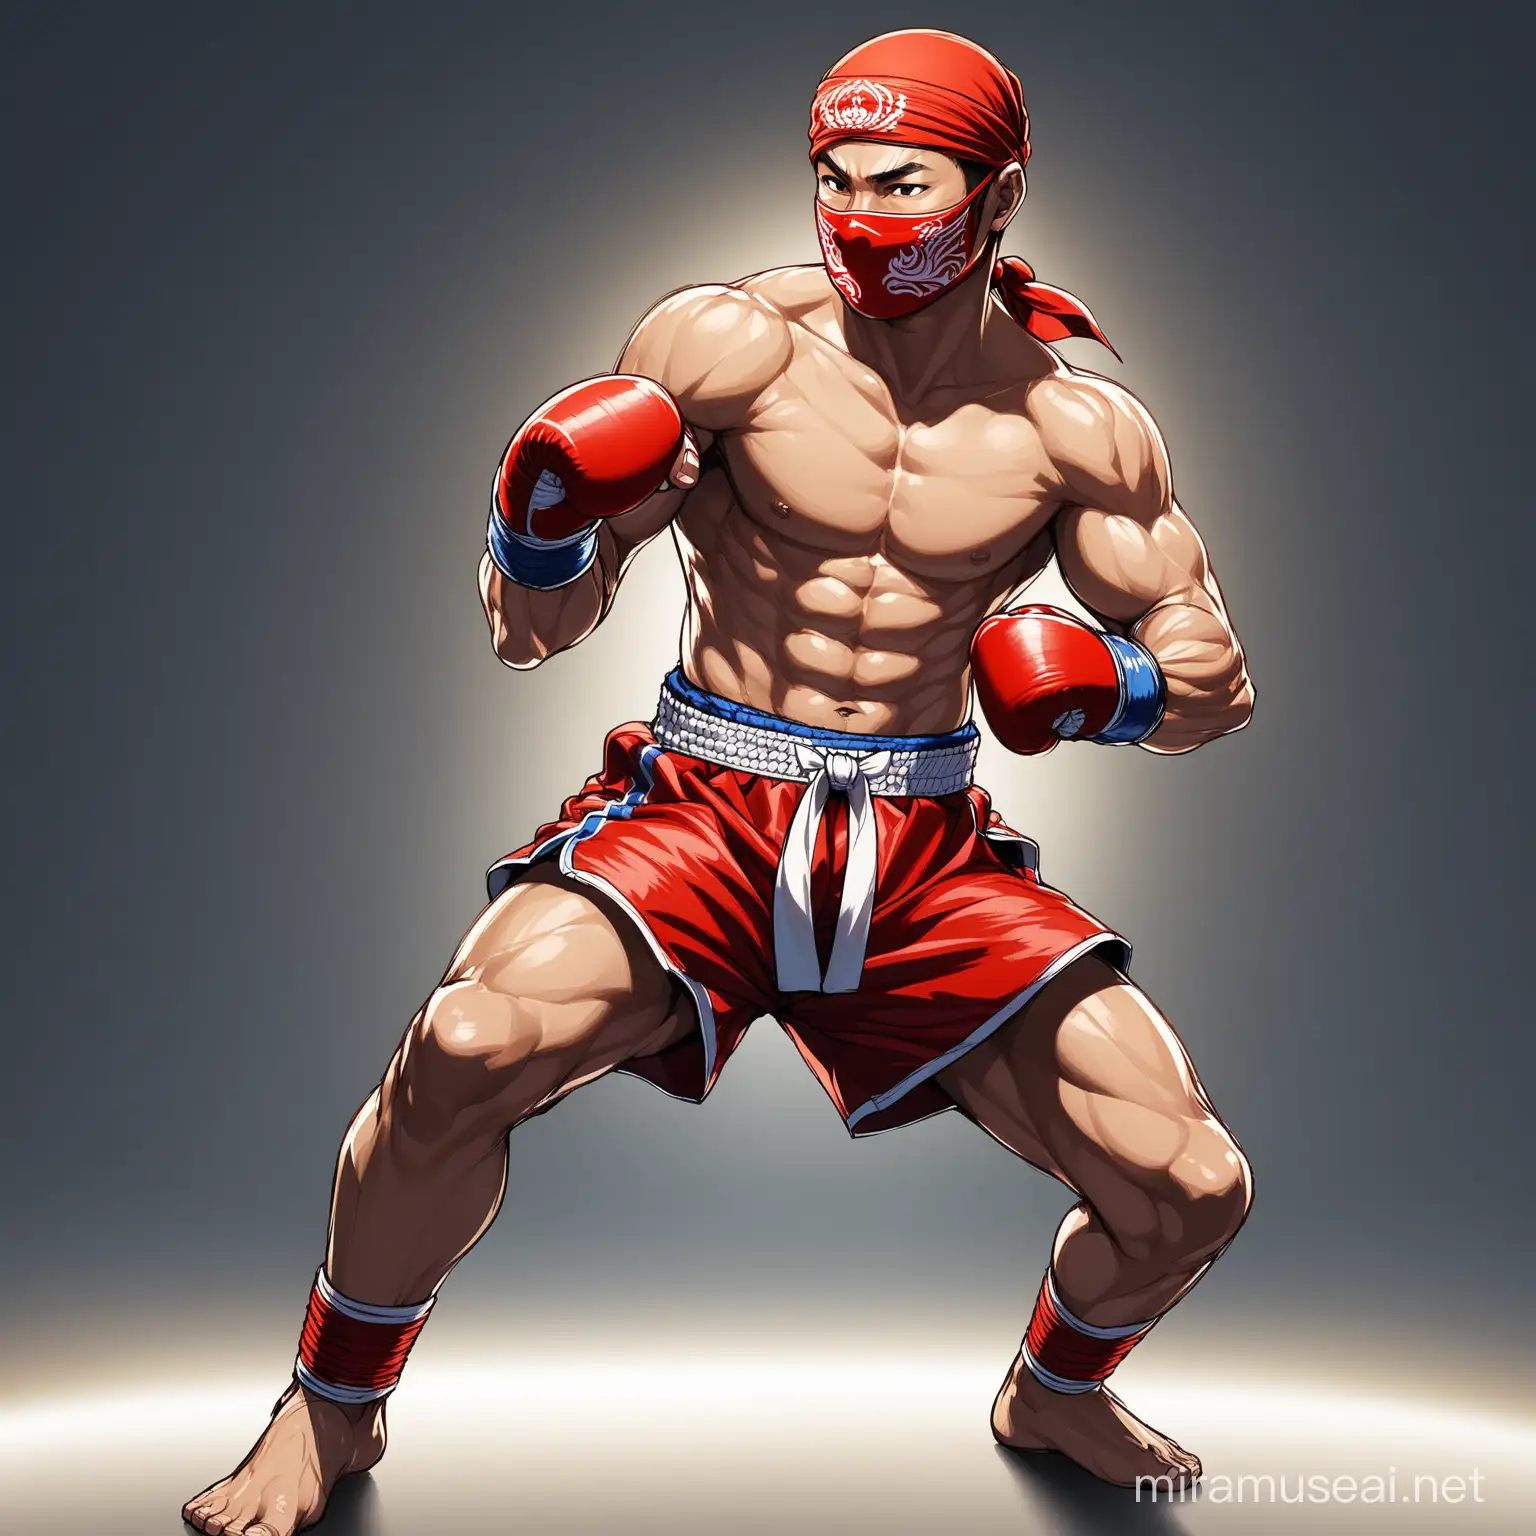 Muay Thai Fighter in Fighting Pose with Hooded Jacket and Bandana